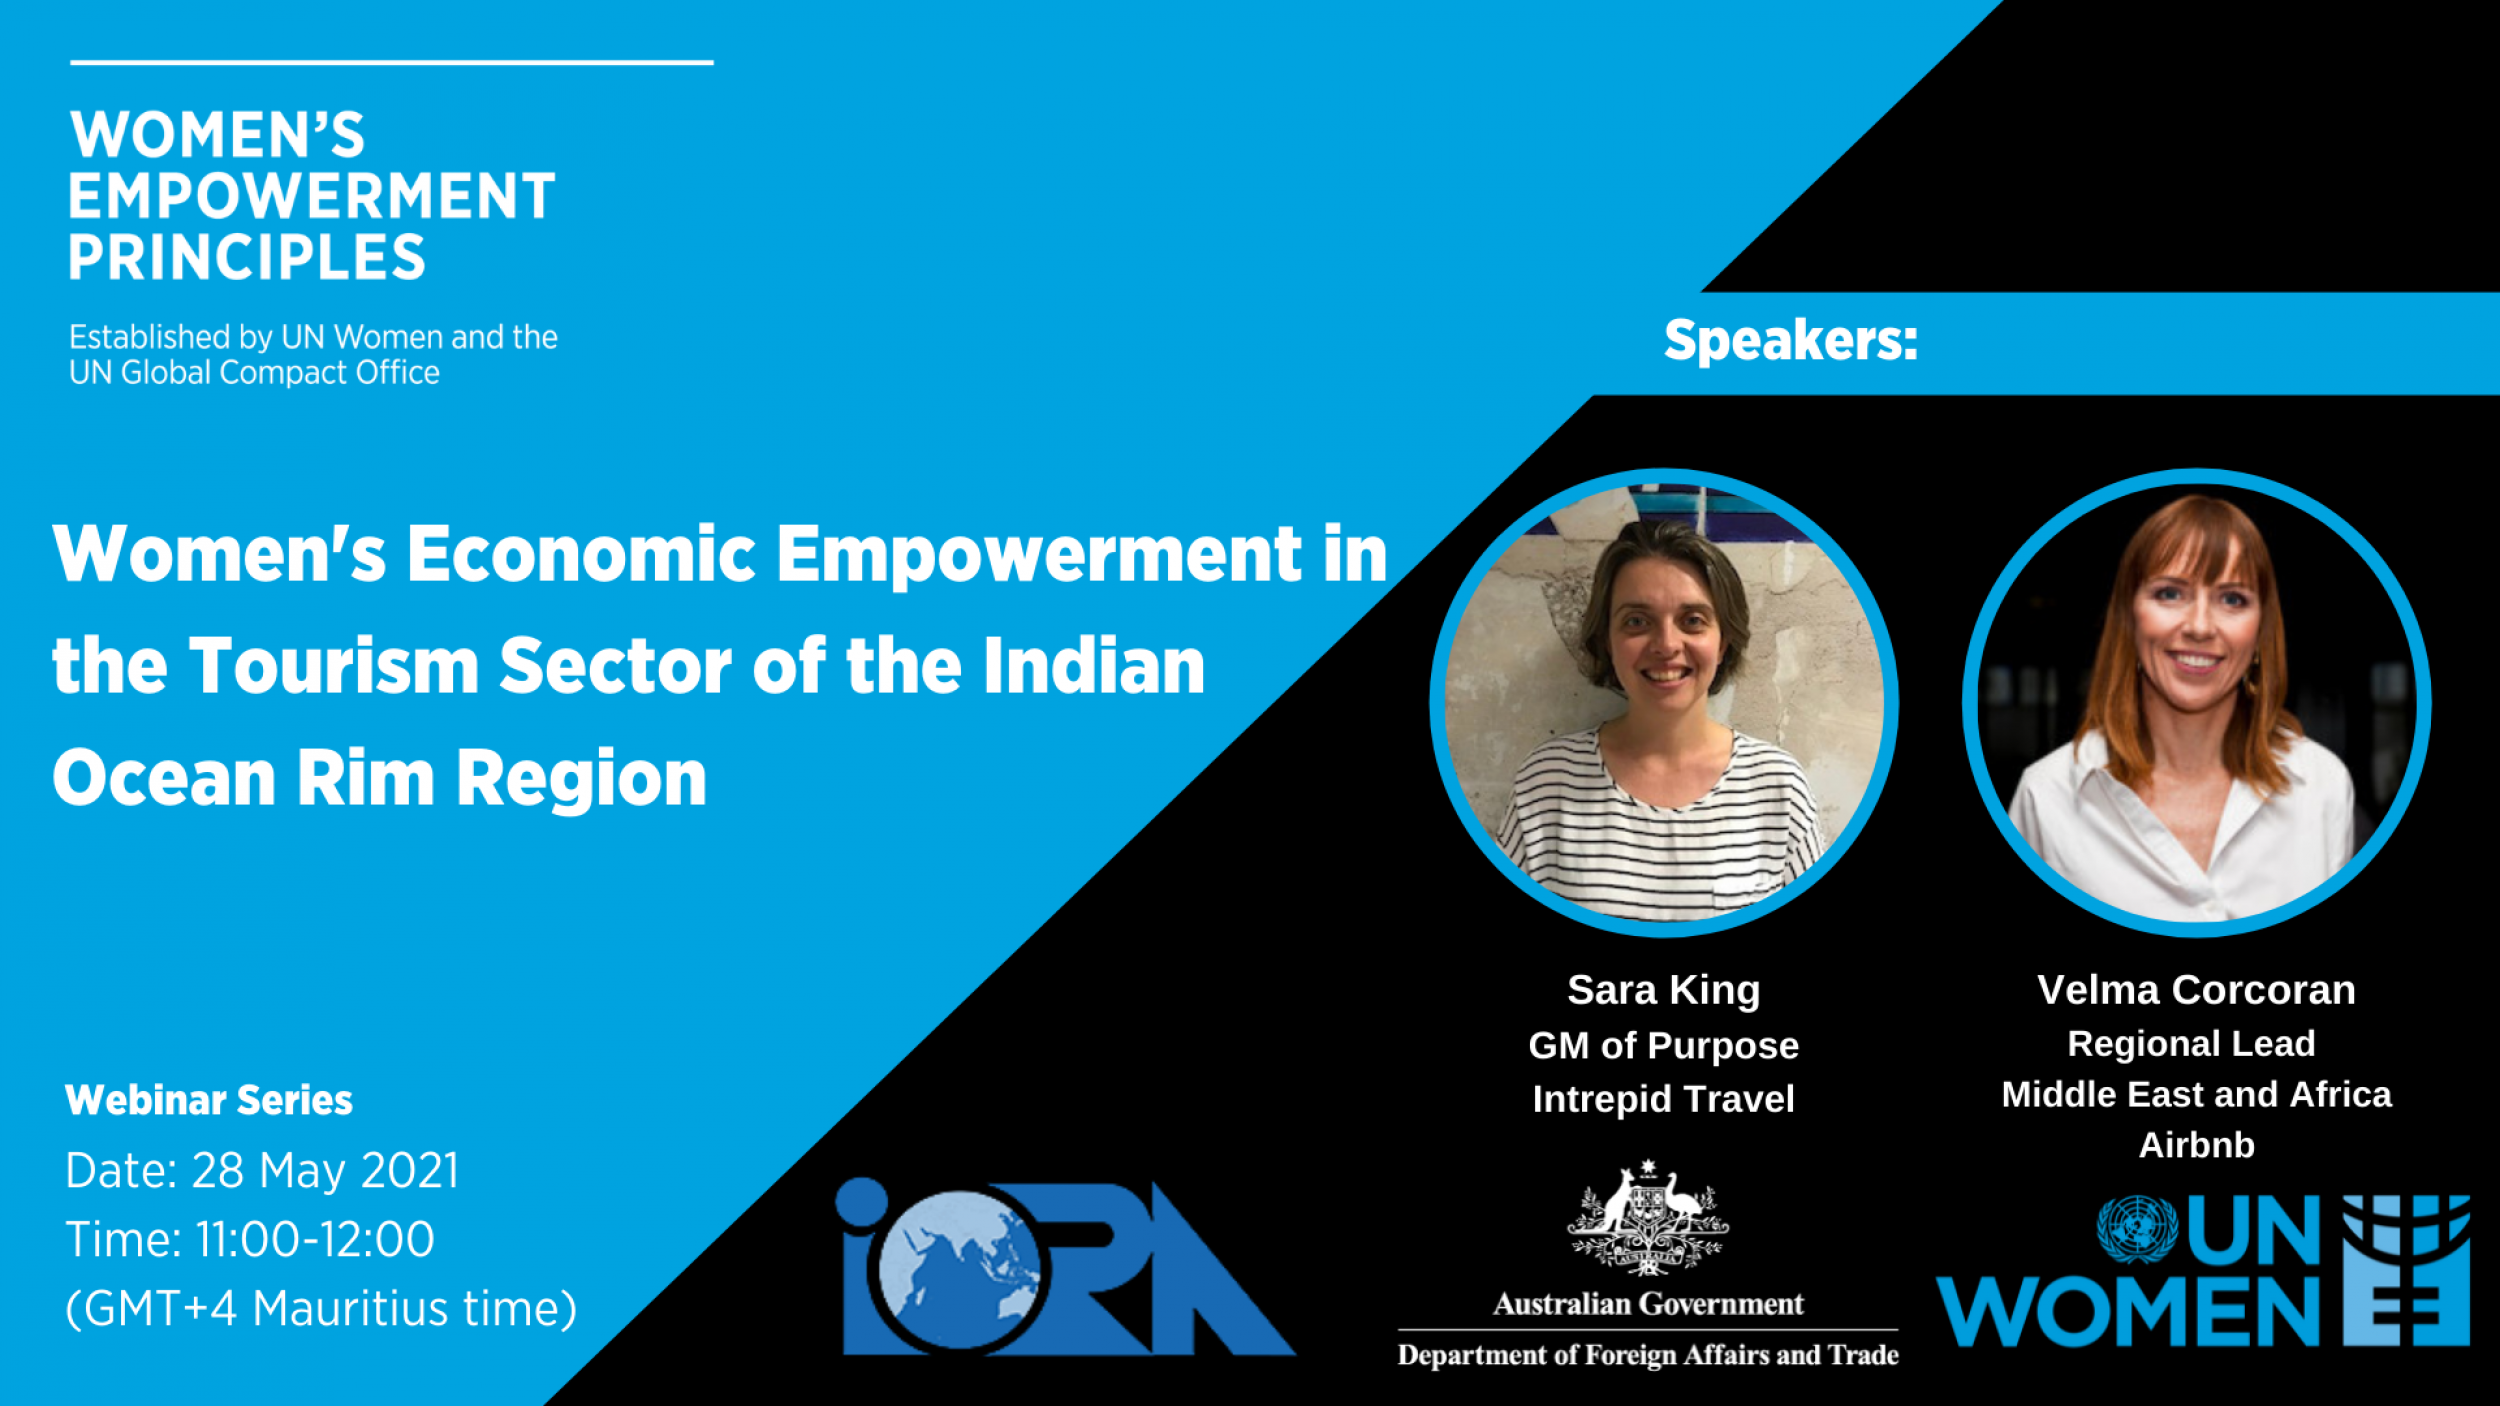 Women’s Economic Empowerment in the Tourism Sector of the Indian Ocean Rim Region